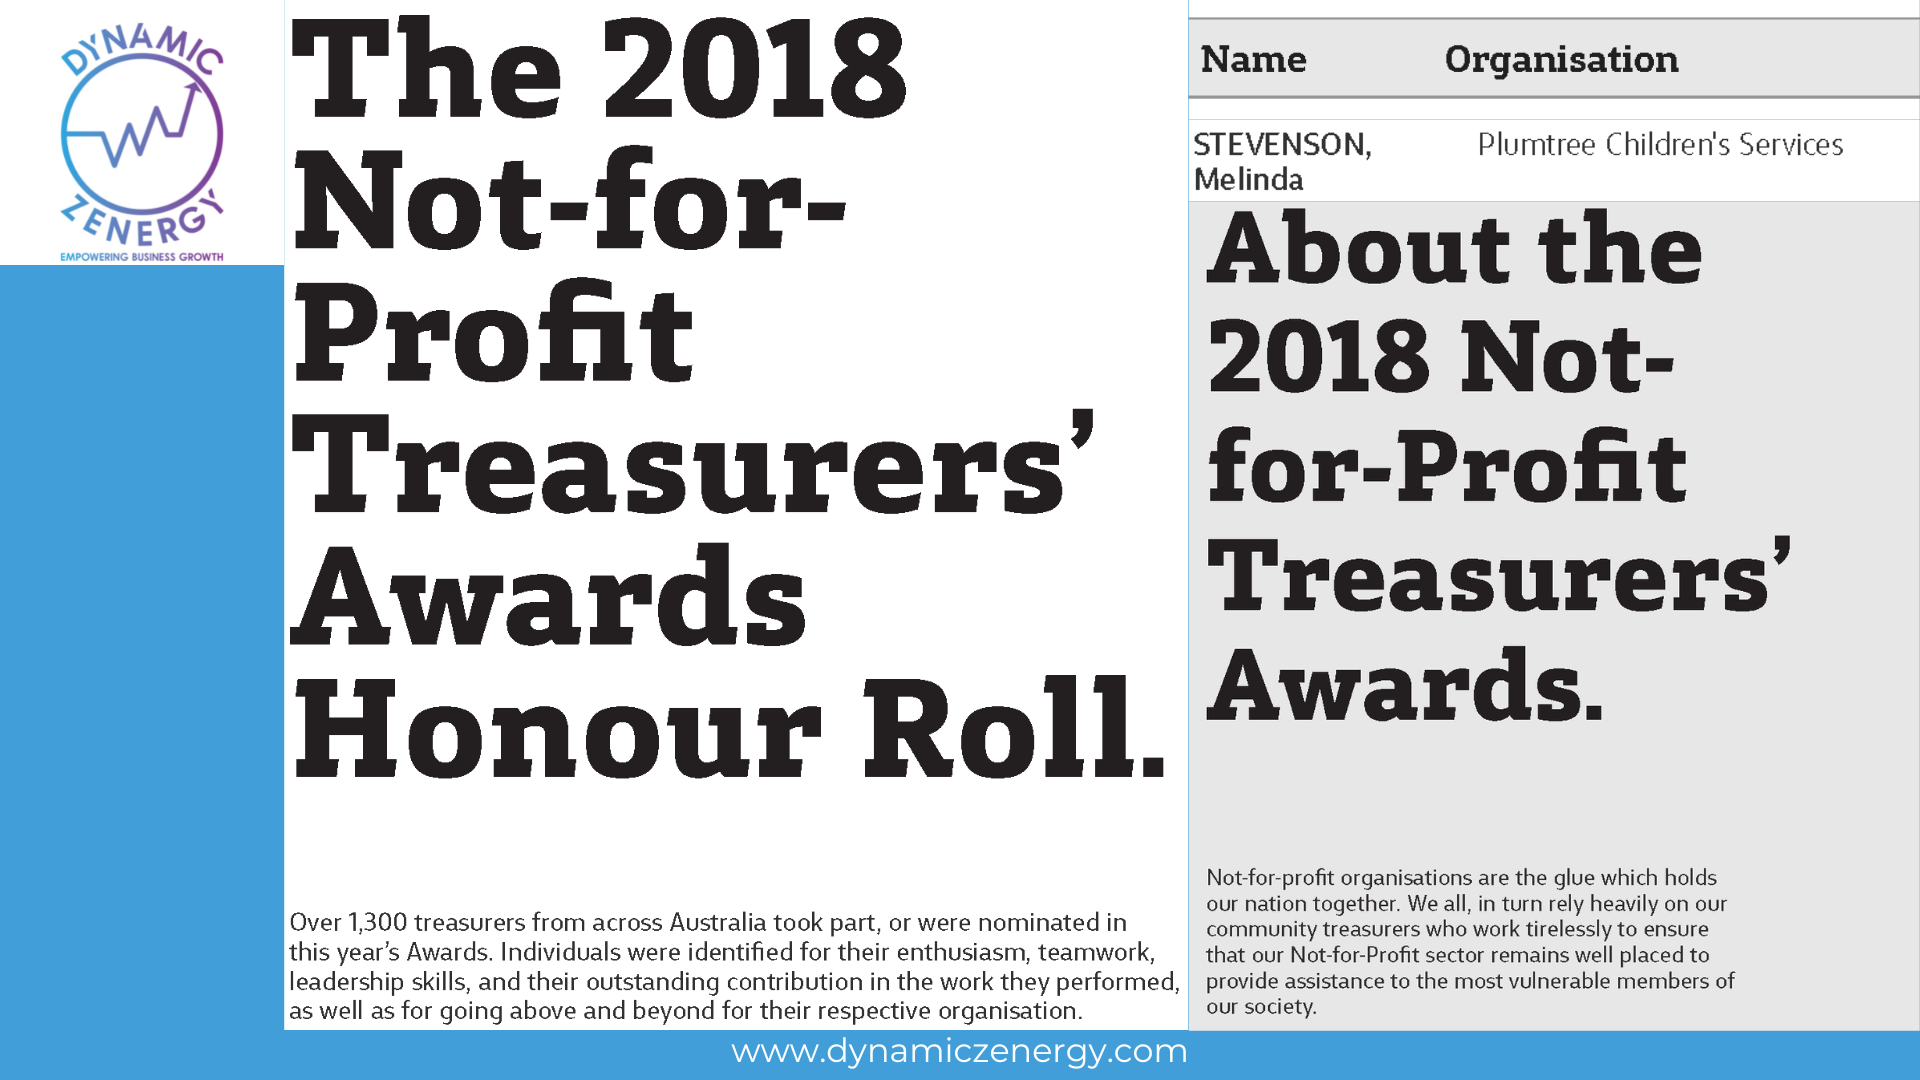 Commonwealth Bank and Our Community Not-for-Profit Treasurers' Awards 2018